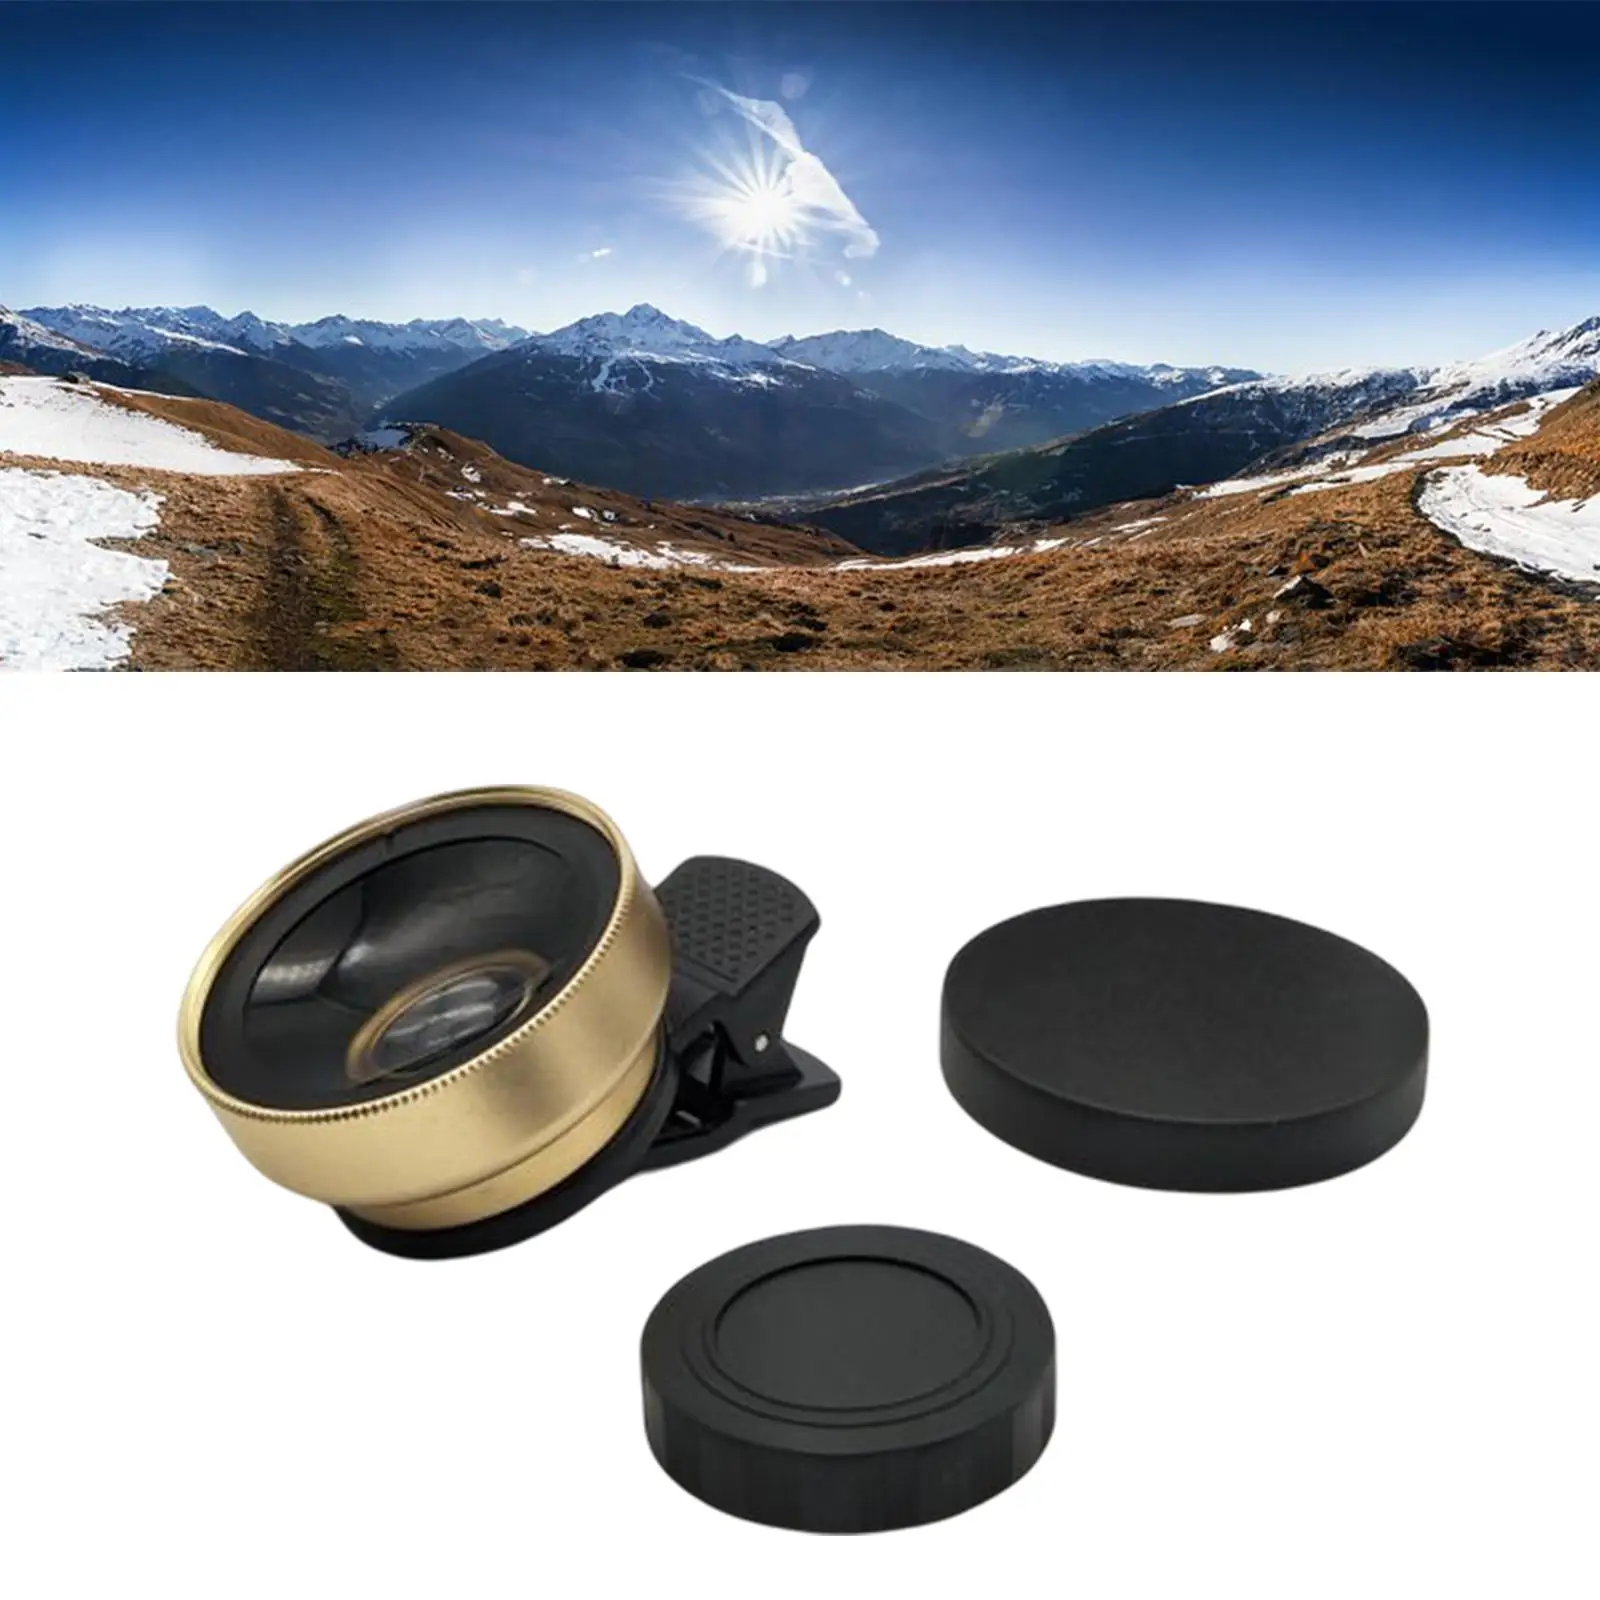 Phone Camera Lens Kit Corners 37mm 0. Super Wide Angle Micro Lens for Cellphone